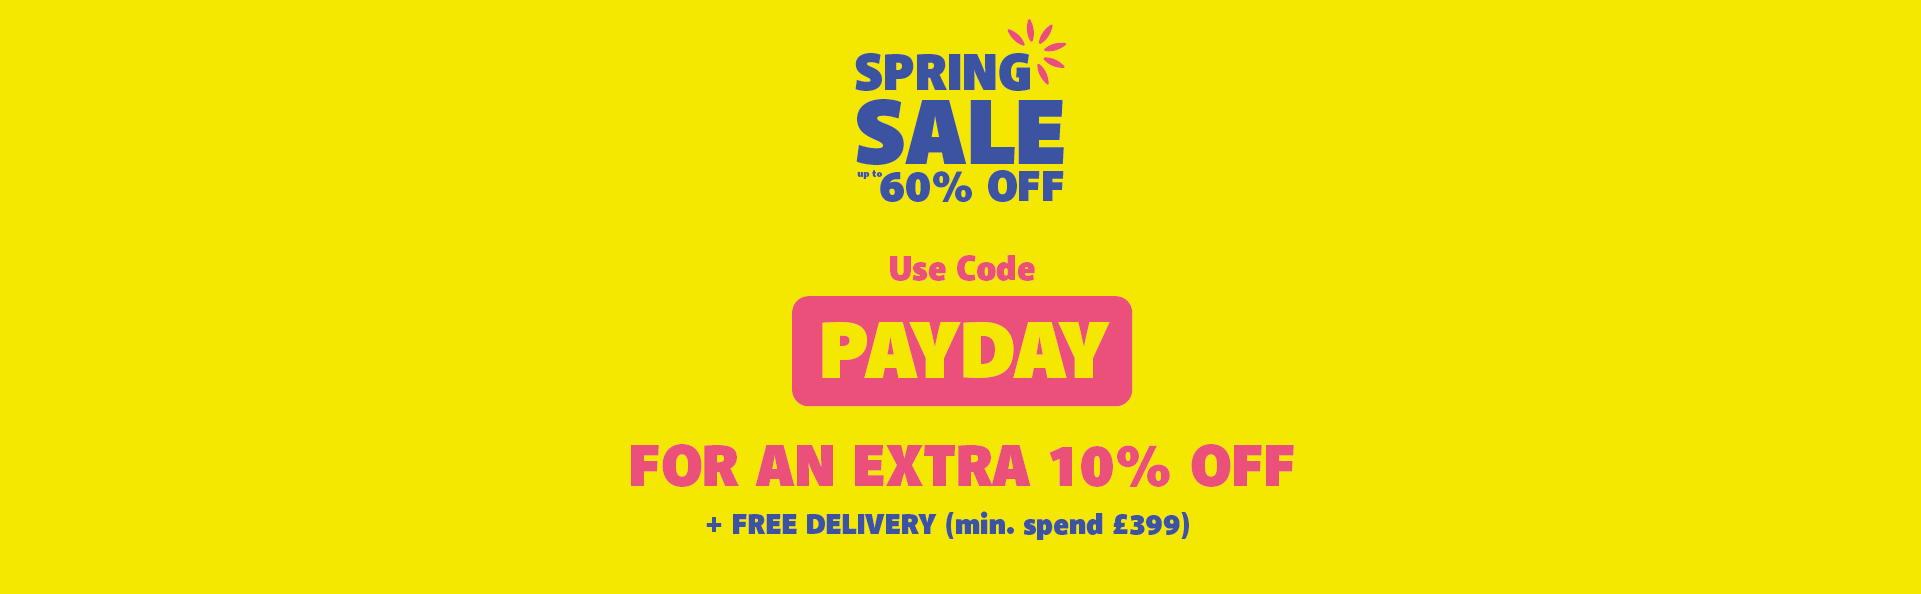 PAYDAY 10% OFF!